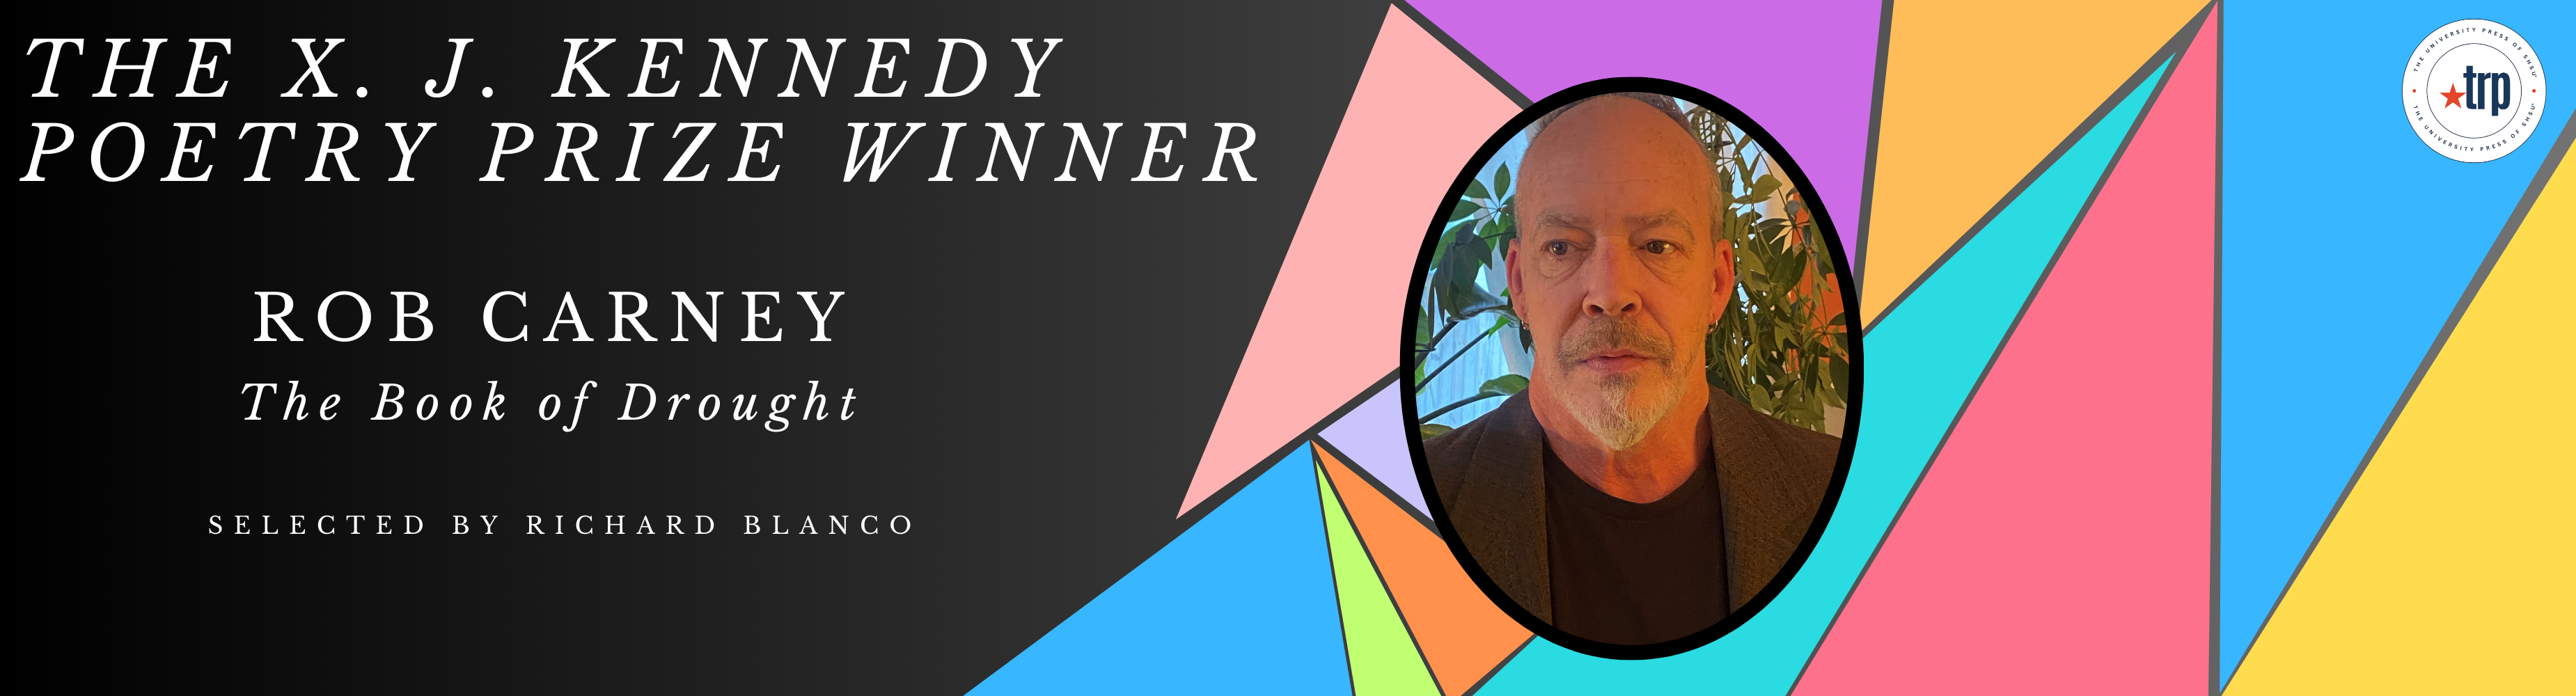 The X. J. Kennedy Poetry Prize Winner is Rob Carney 